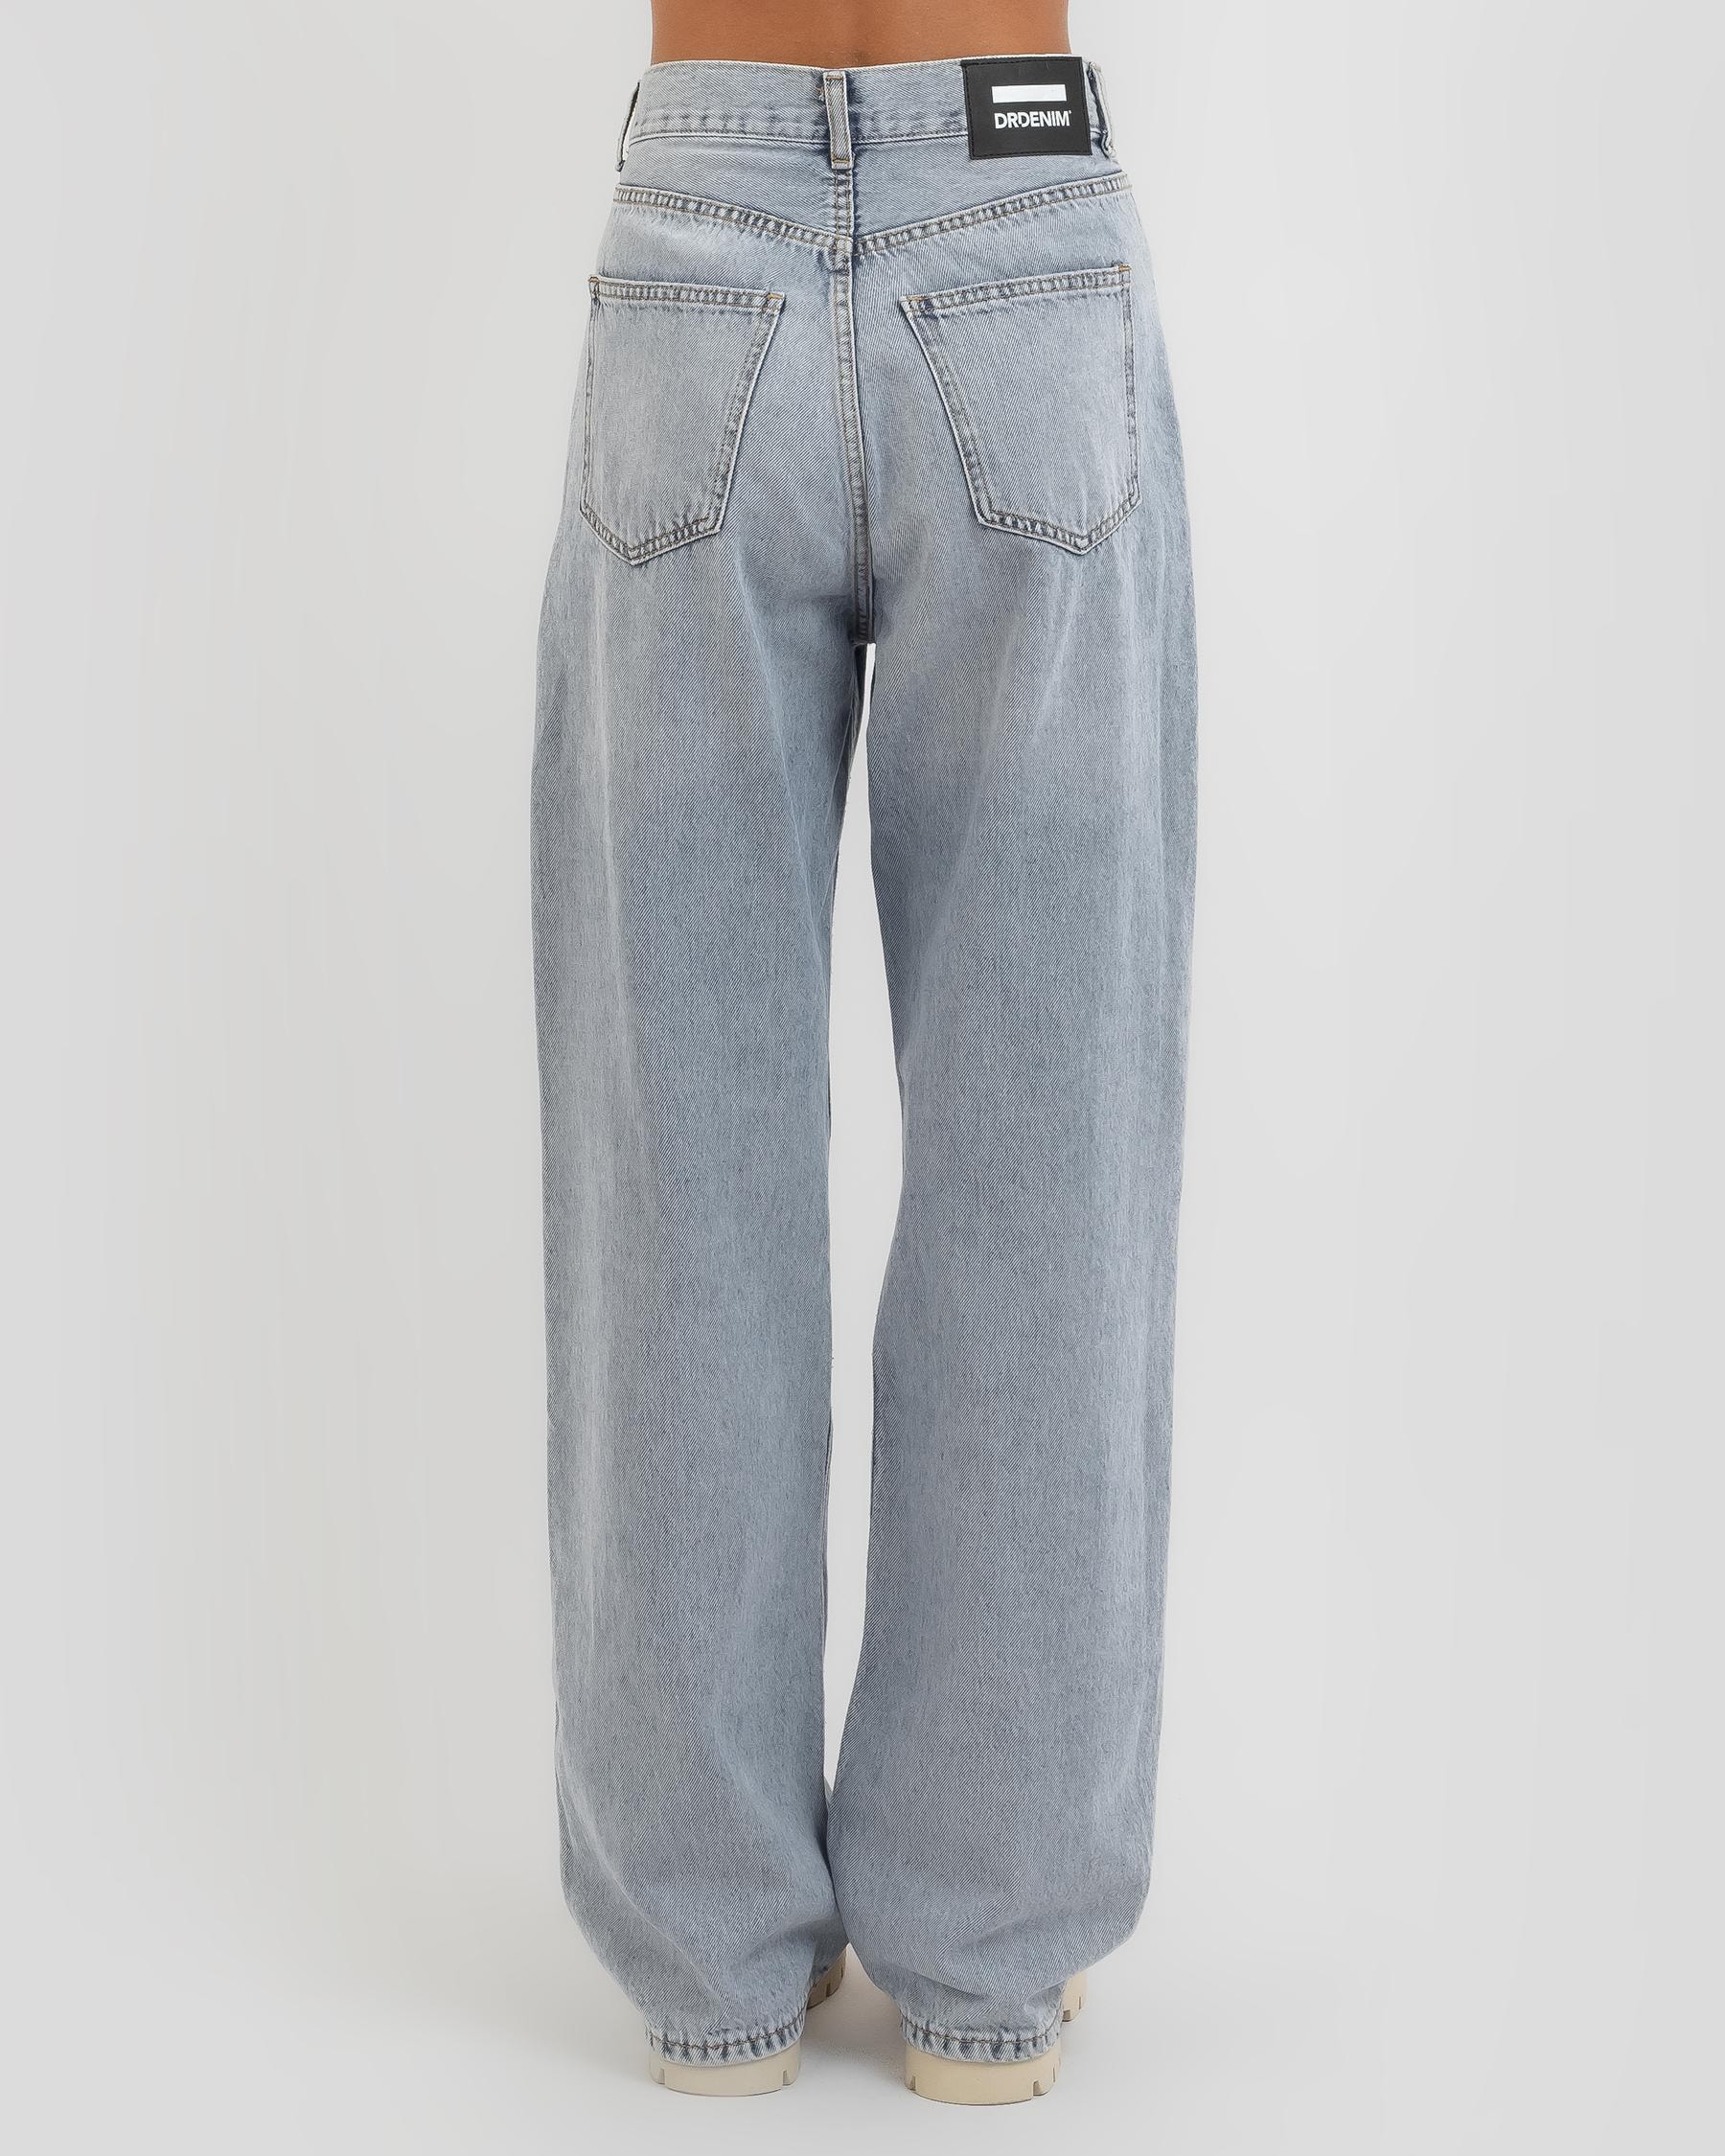 Dr Denim Echo Jeans In Bleach Sky Ripped - Fast Shipping & Easy Returns ...